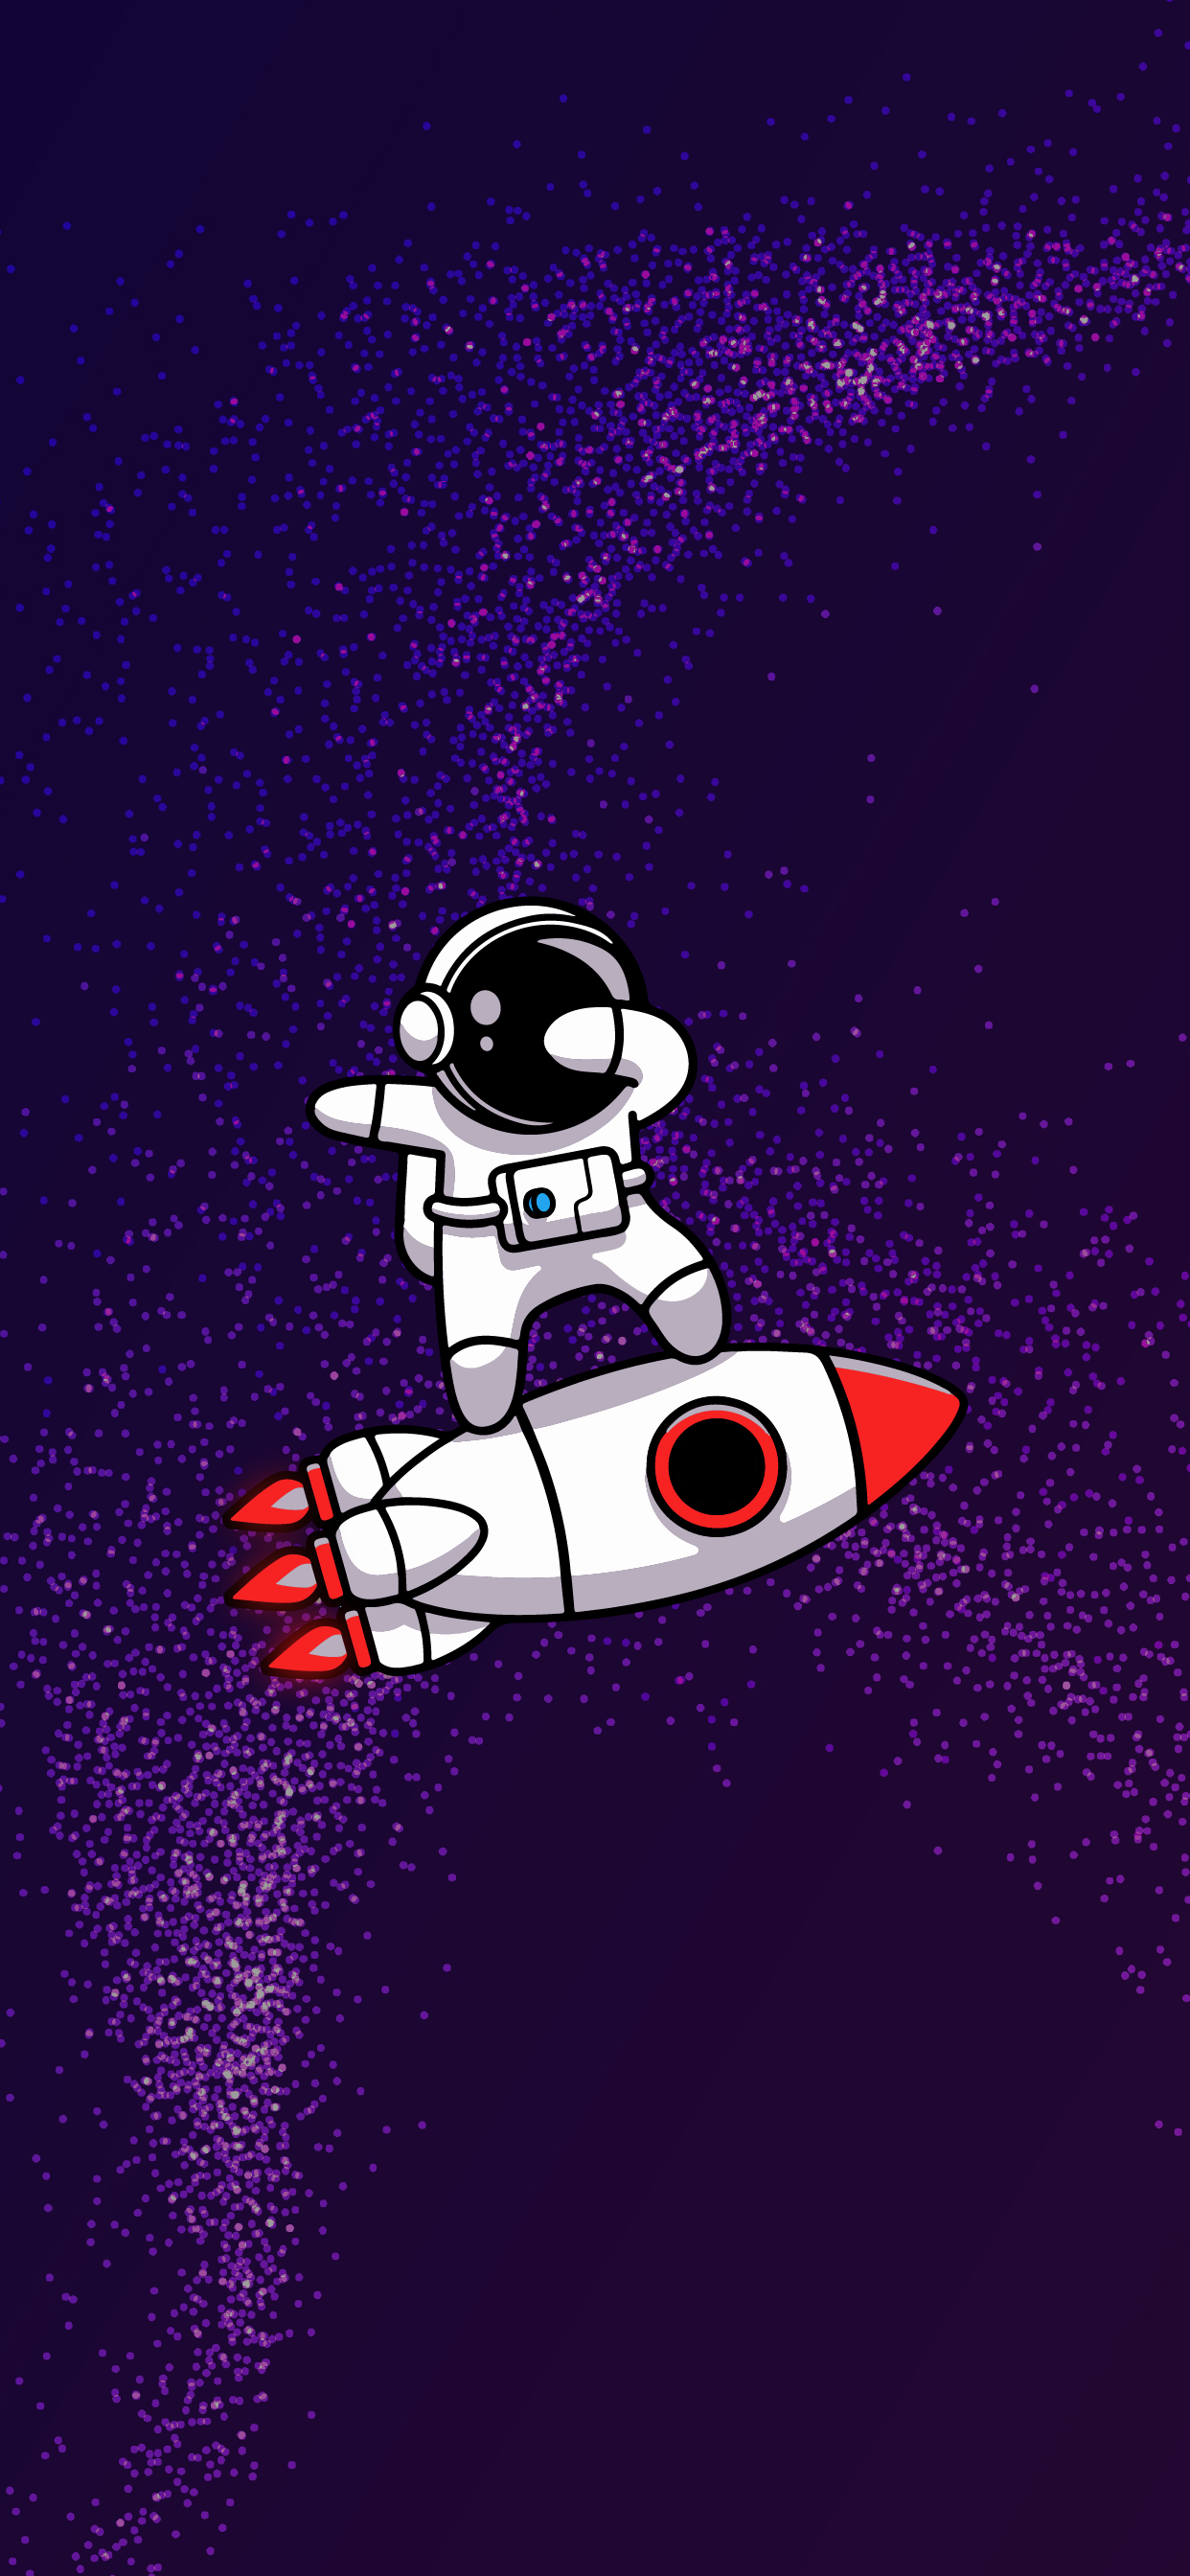 Cute Astronaut iPhone Wallpapers